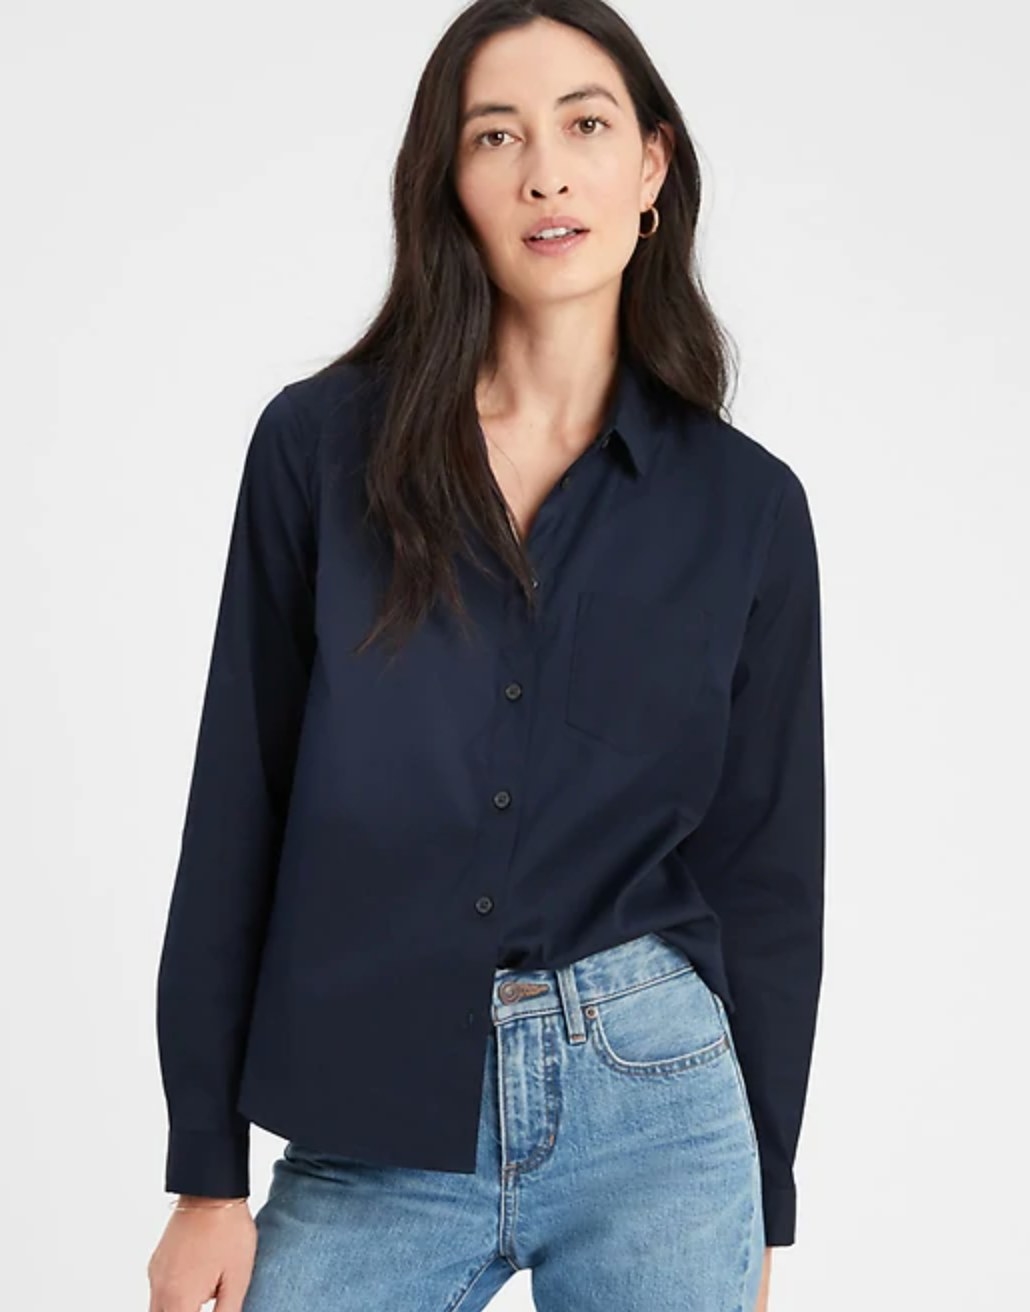 The tailored non-iron shirt in navy